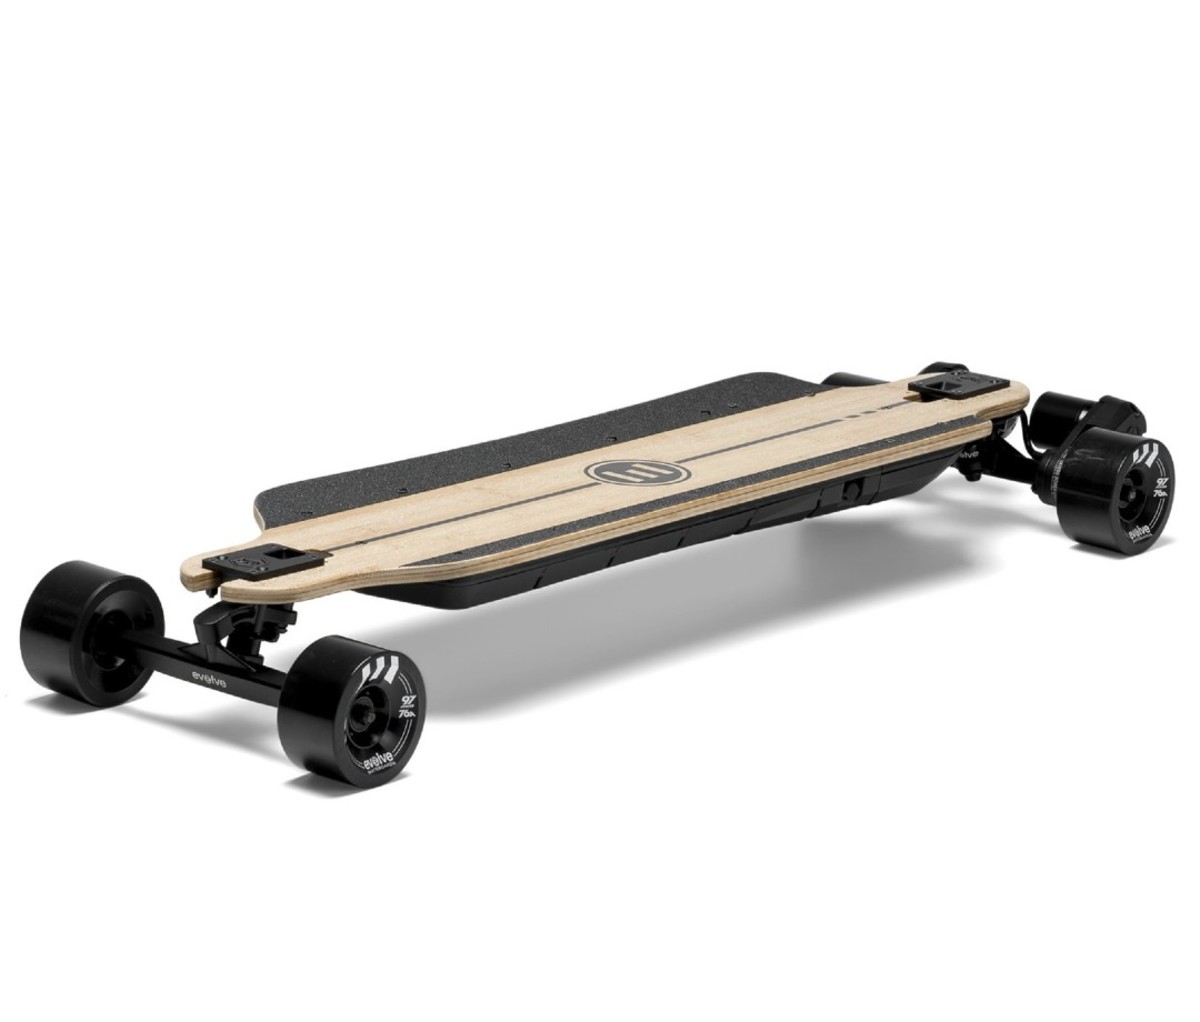 Closely angel Australia Best Electric Skateboards From $250 to Over $2,500 | Men's Journal